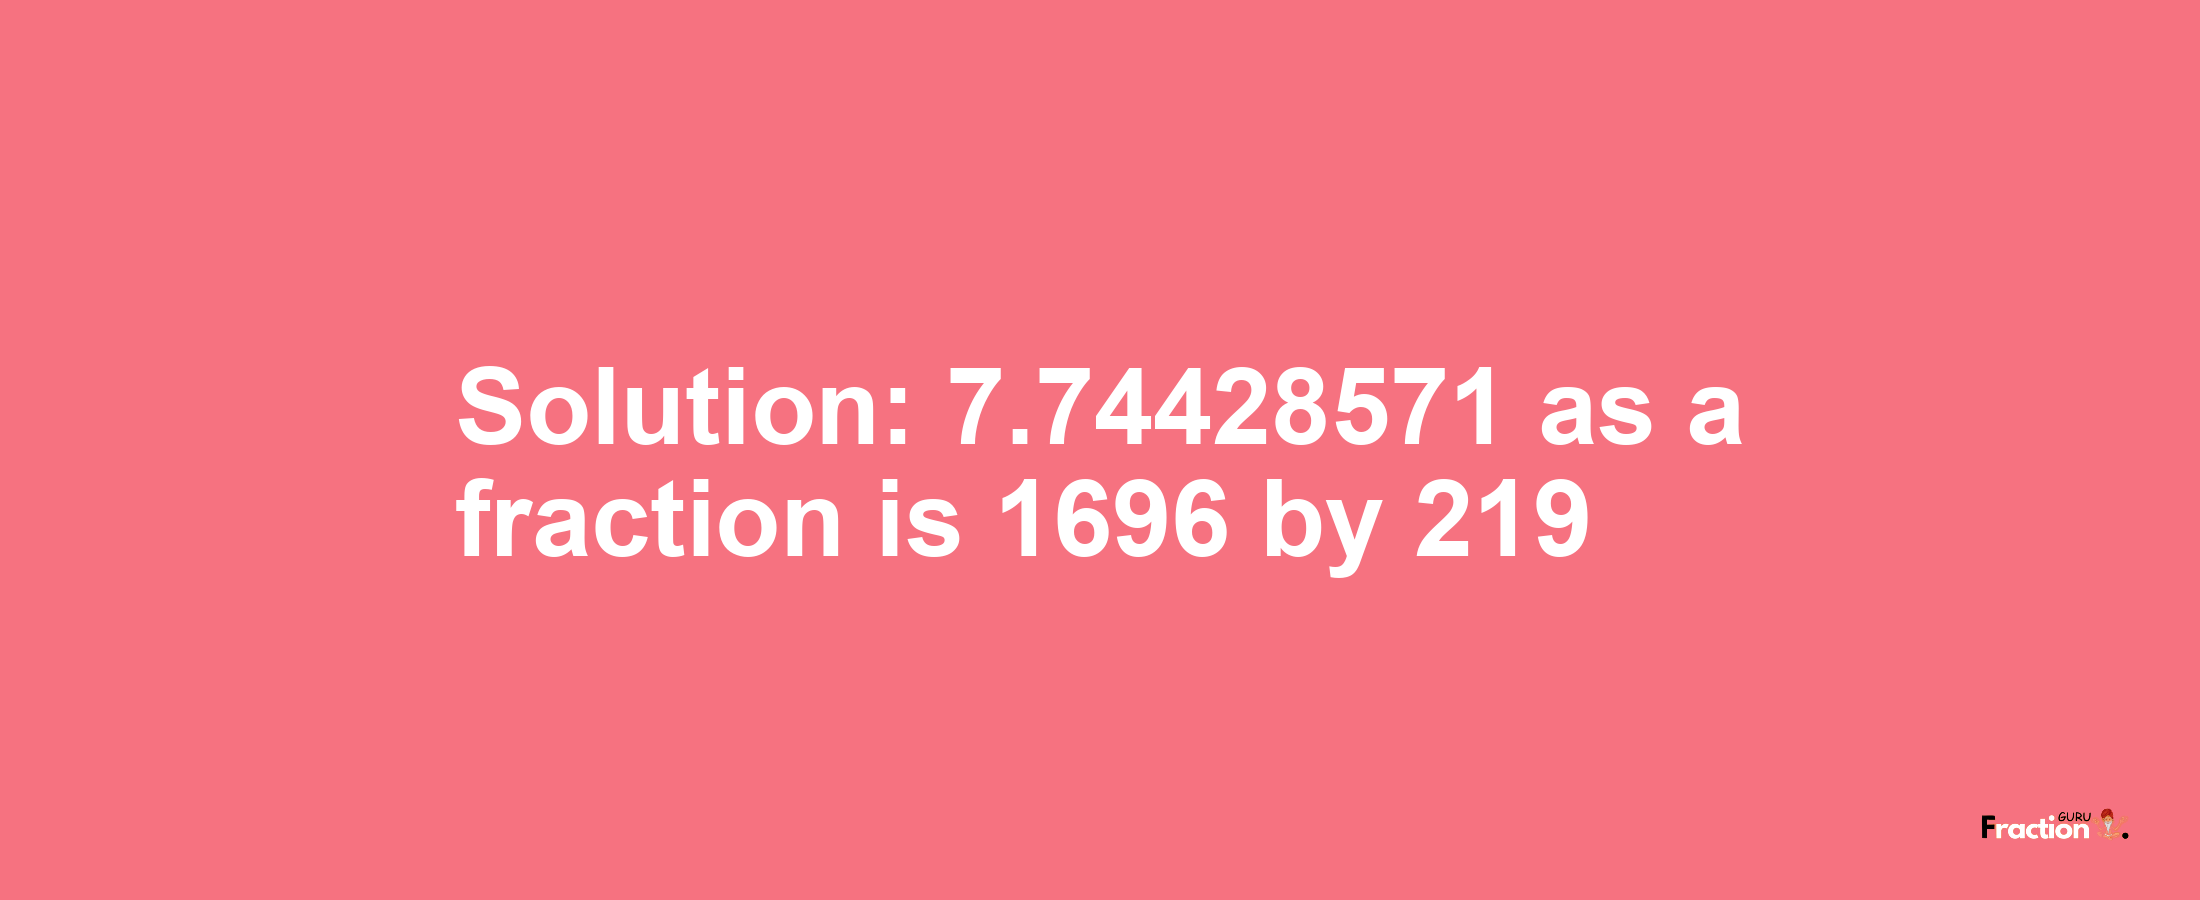 Solution:7.74428571 as a fraction is 1696/219